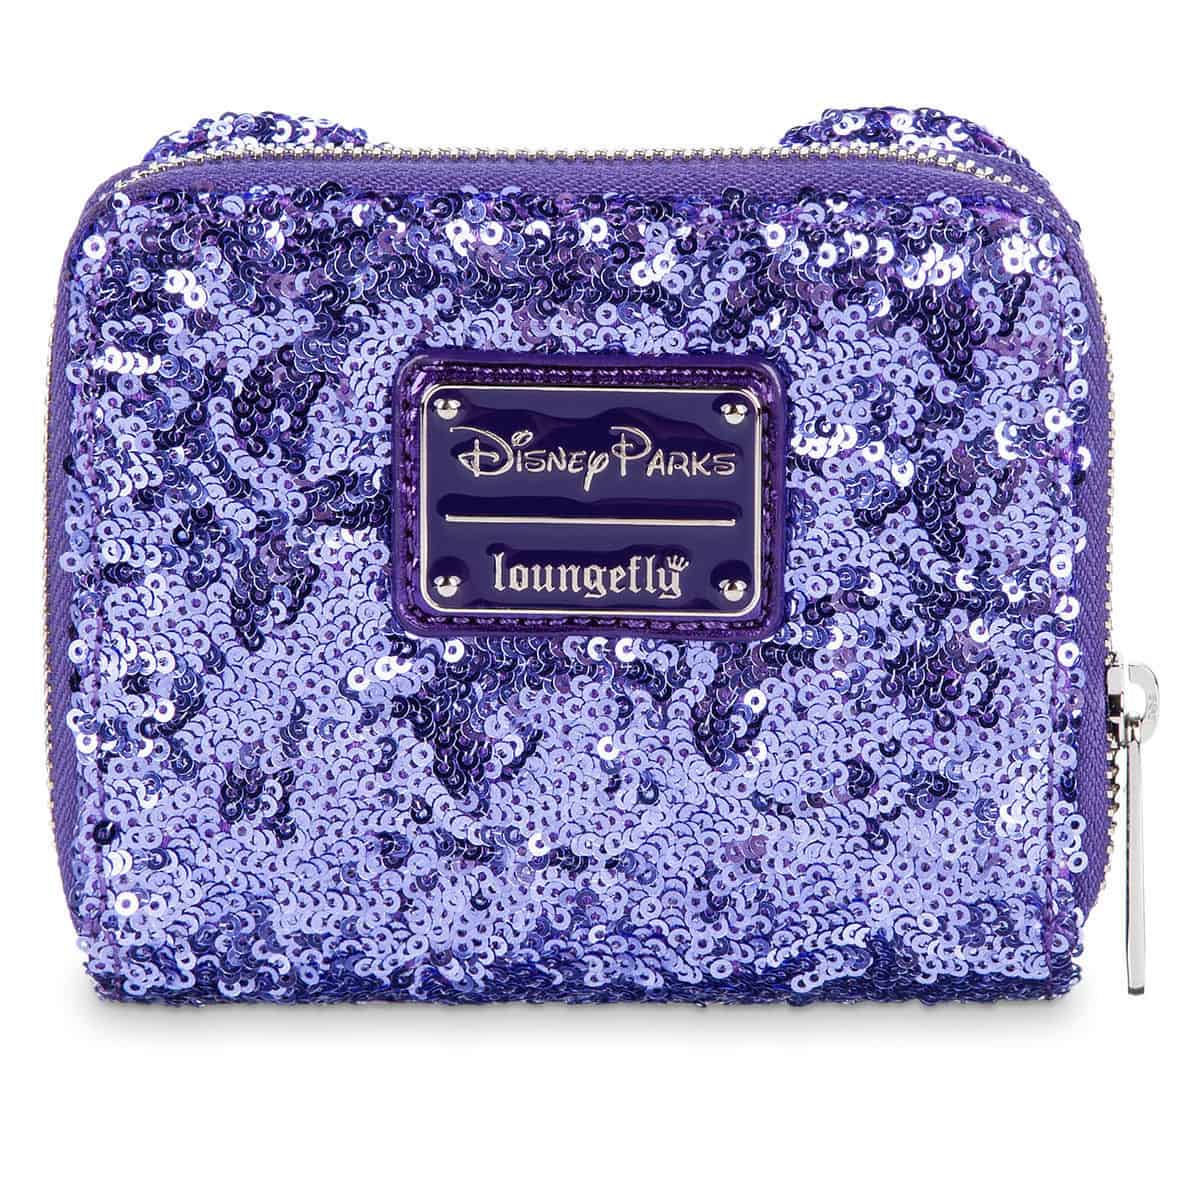 Minnie Mouse Potion Purple Sequined Wallet by Loungefly - $50.00